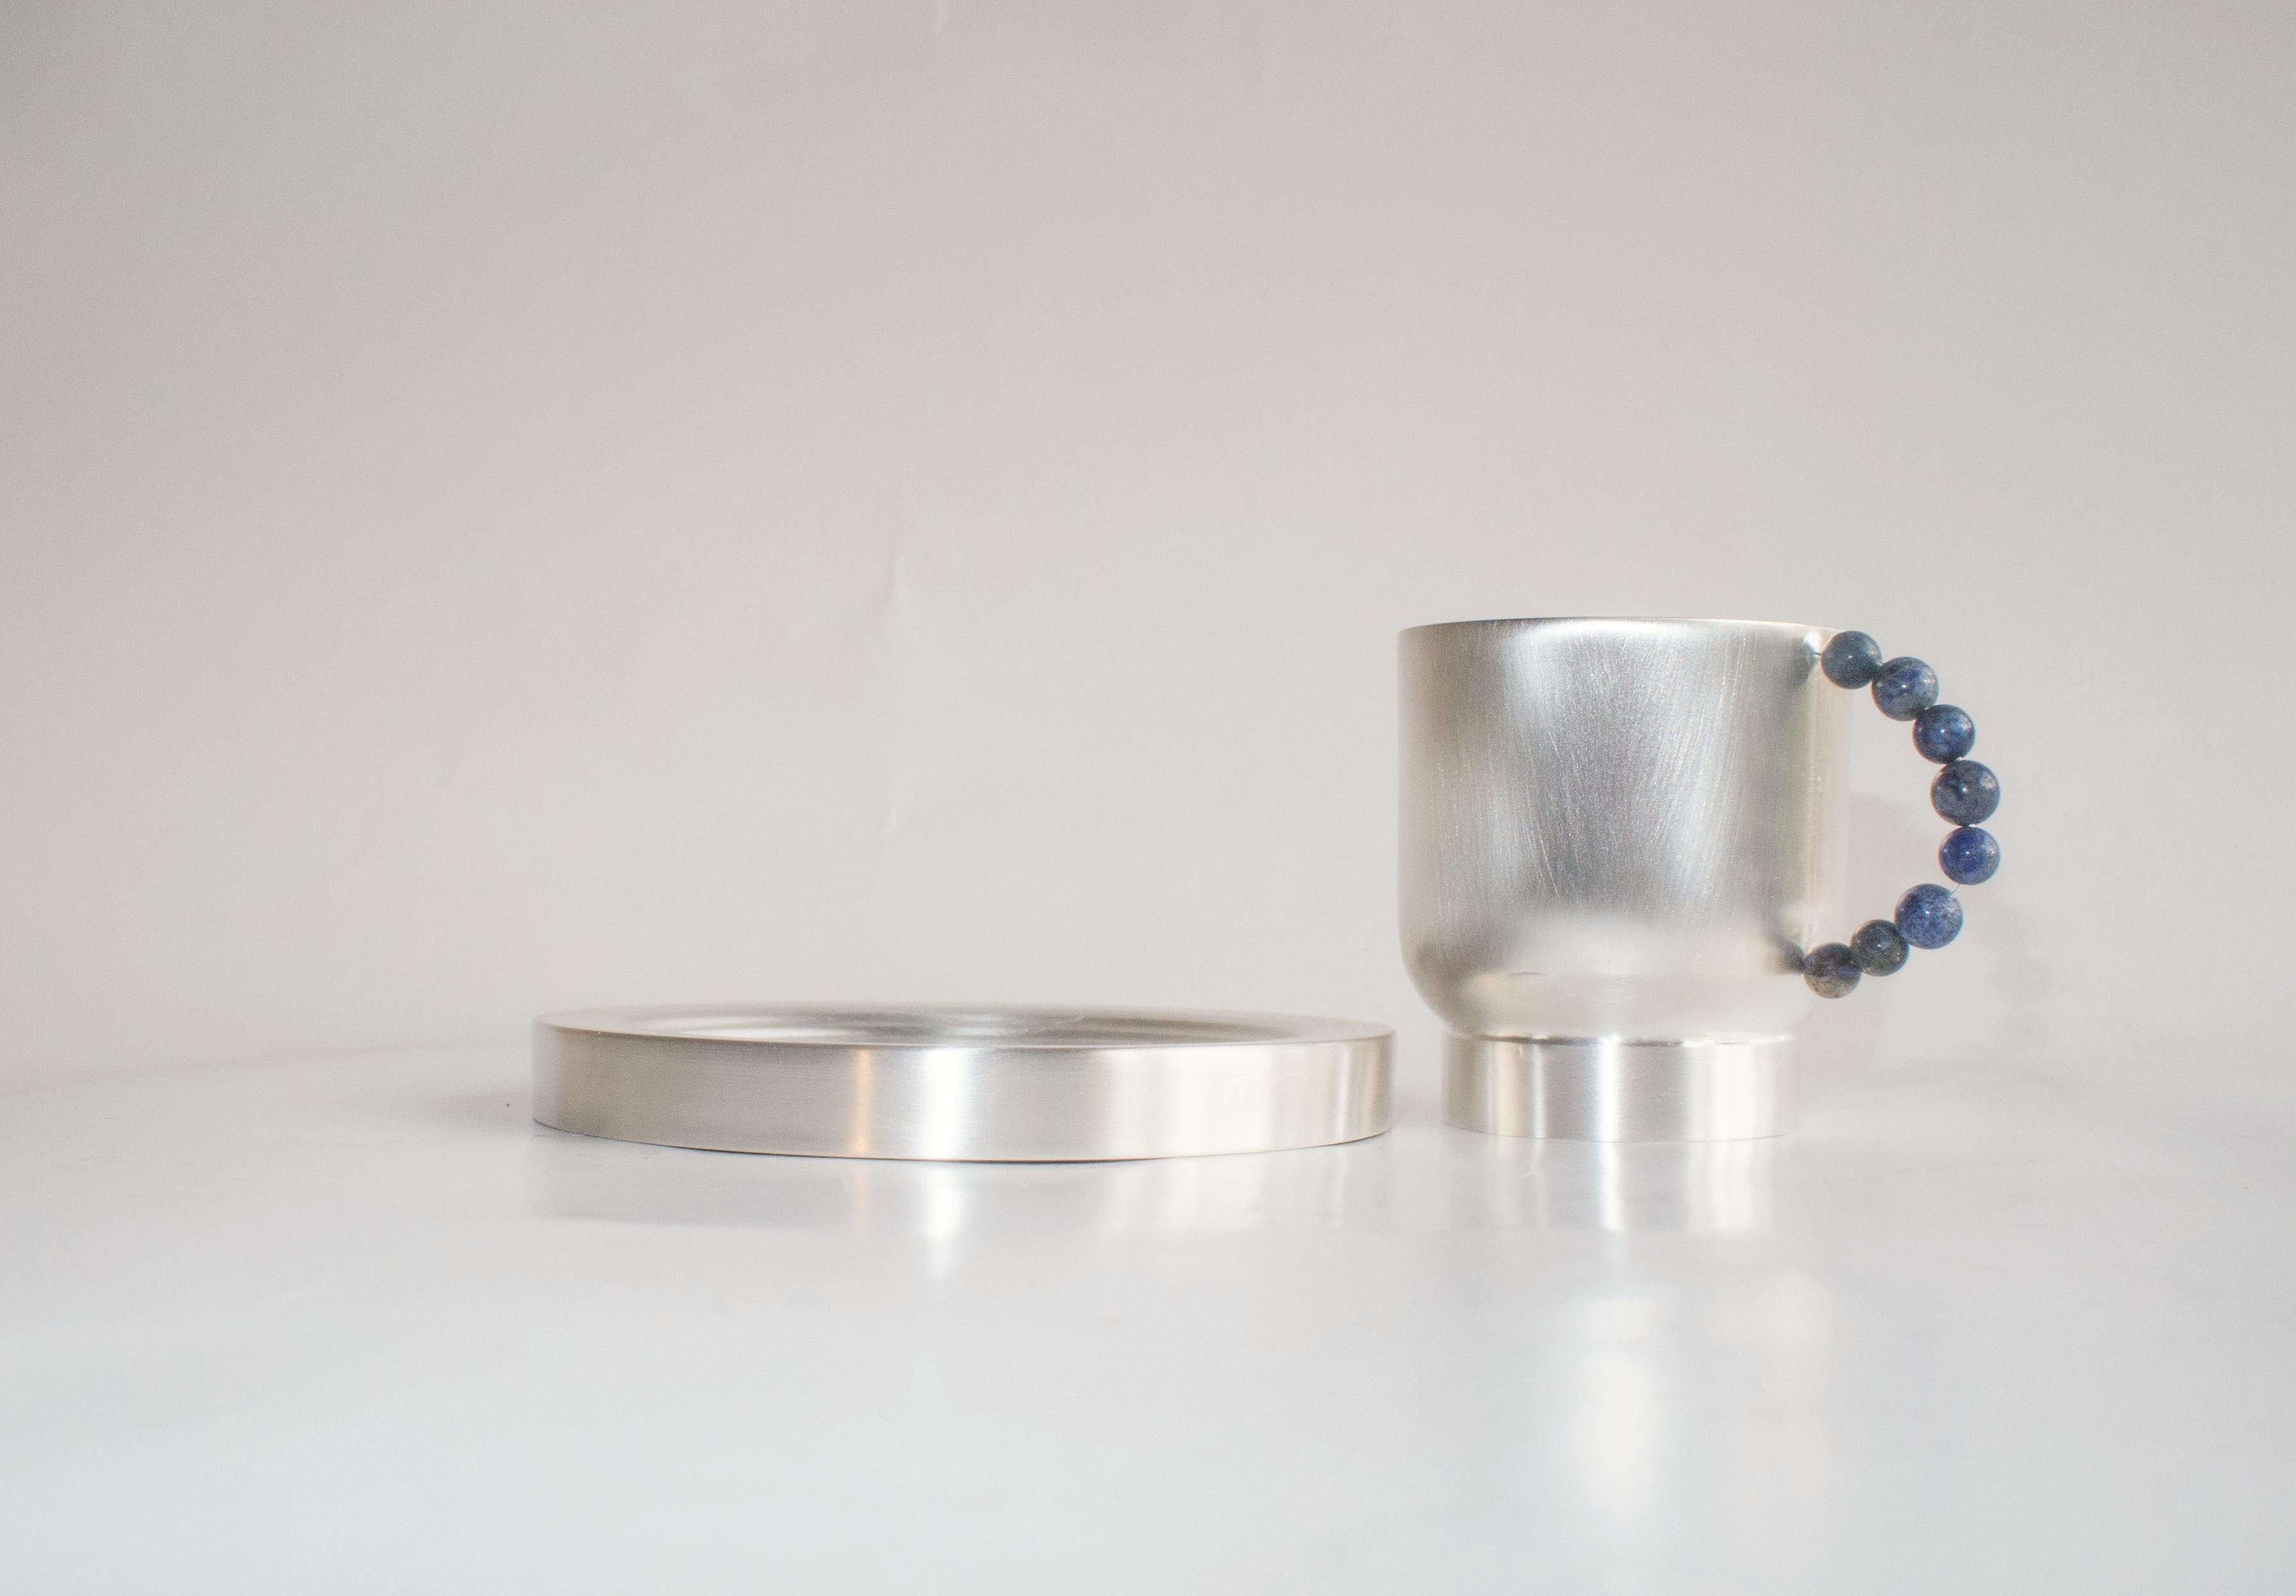 Elevate your daily tea or coffee ritual with our  perlina cup and piattino. The plated brass cup and plate are handcrafted in italy using sheet turning techniques. The handle, adorned with a row of lapiz lazuli  or white stones, introduces a touch